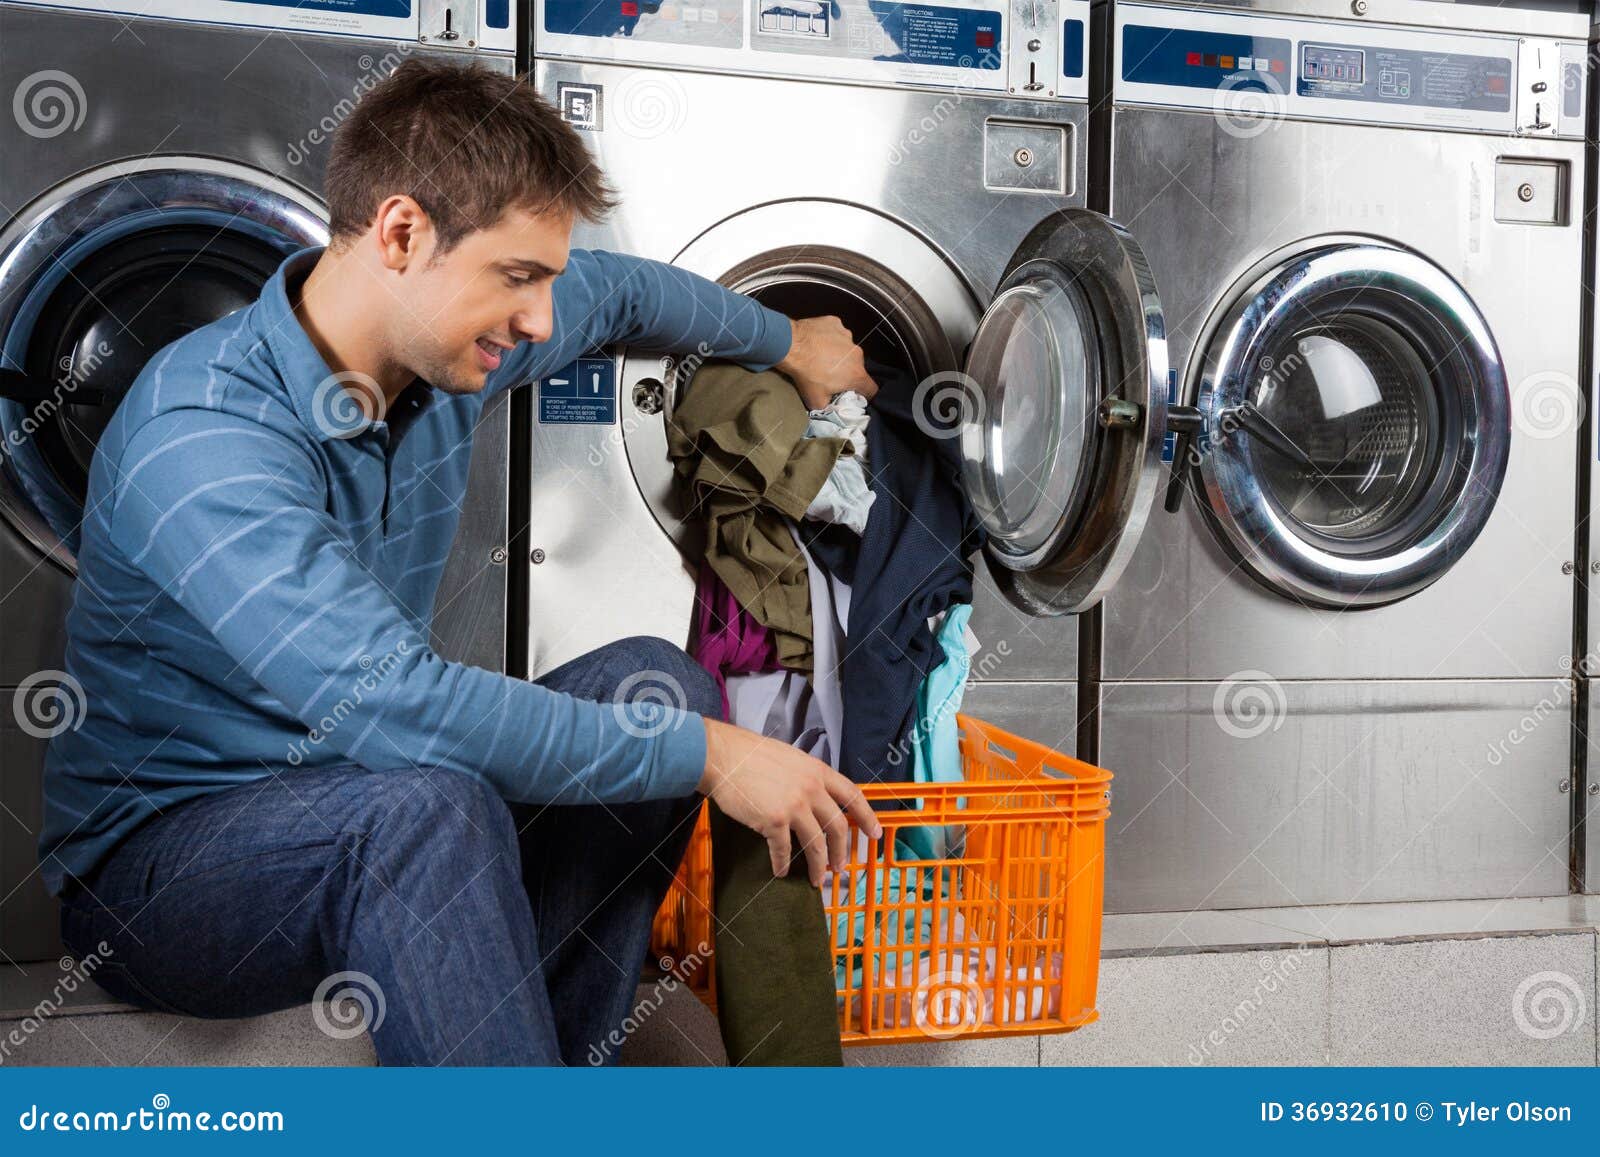 https://thumbs.dreamstime.com/z/man-putting-clothes-washing-machine-young-laundromat-36932610.jpg